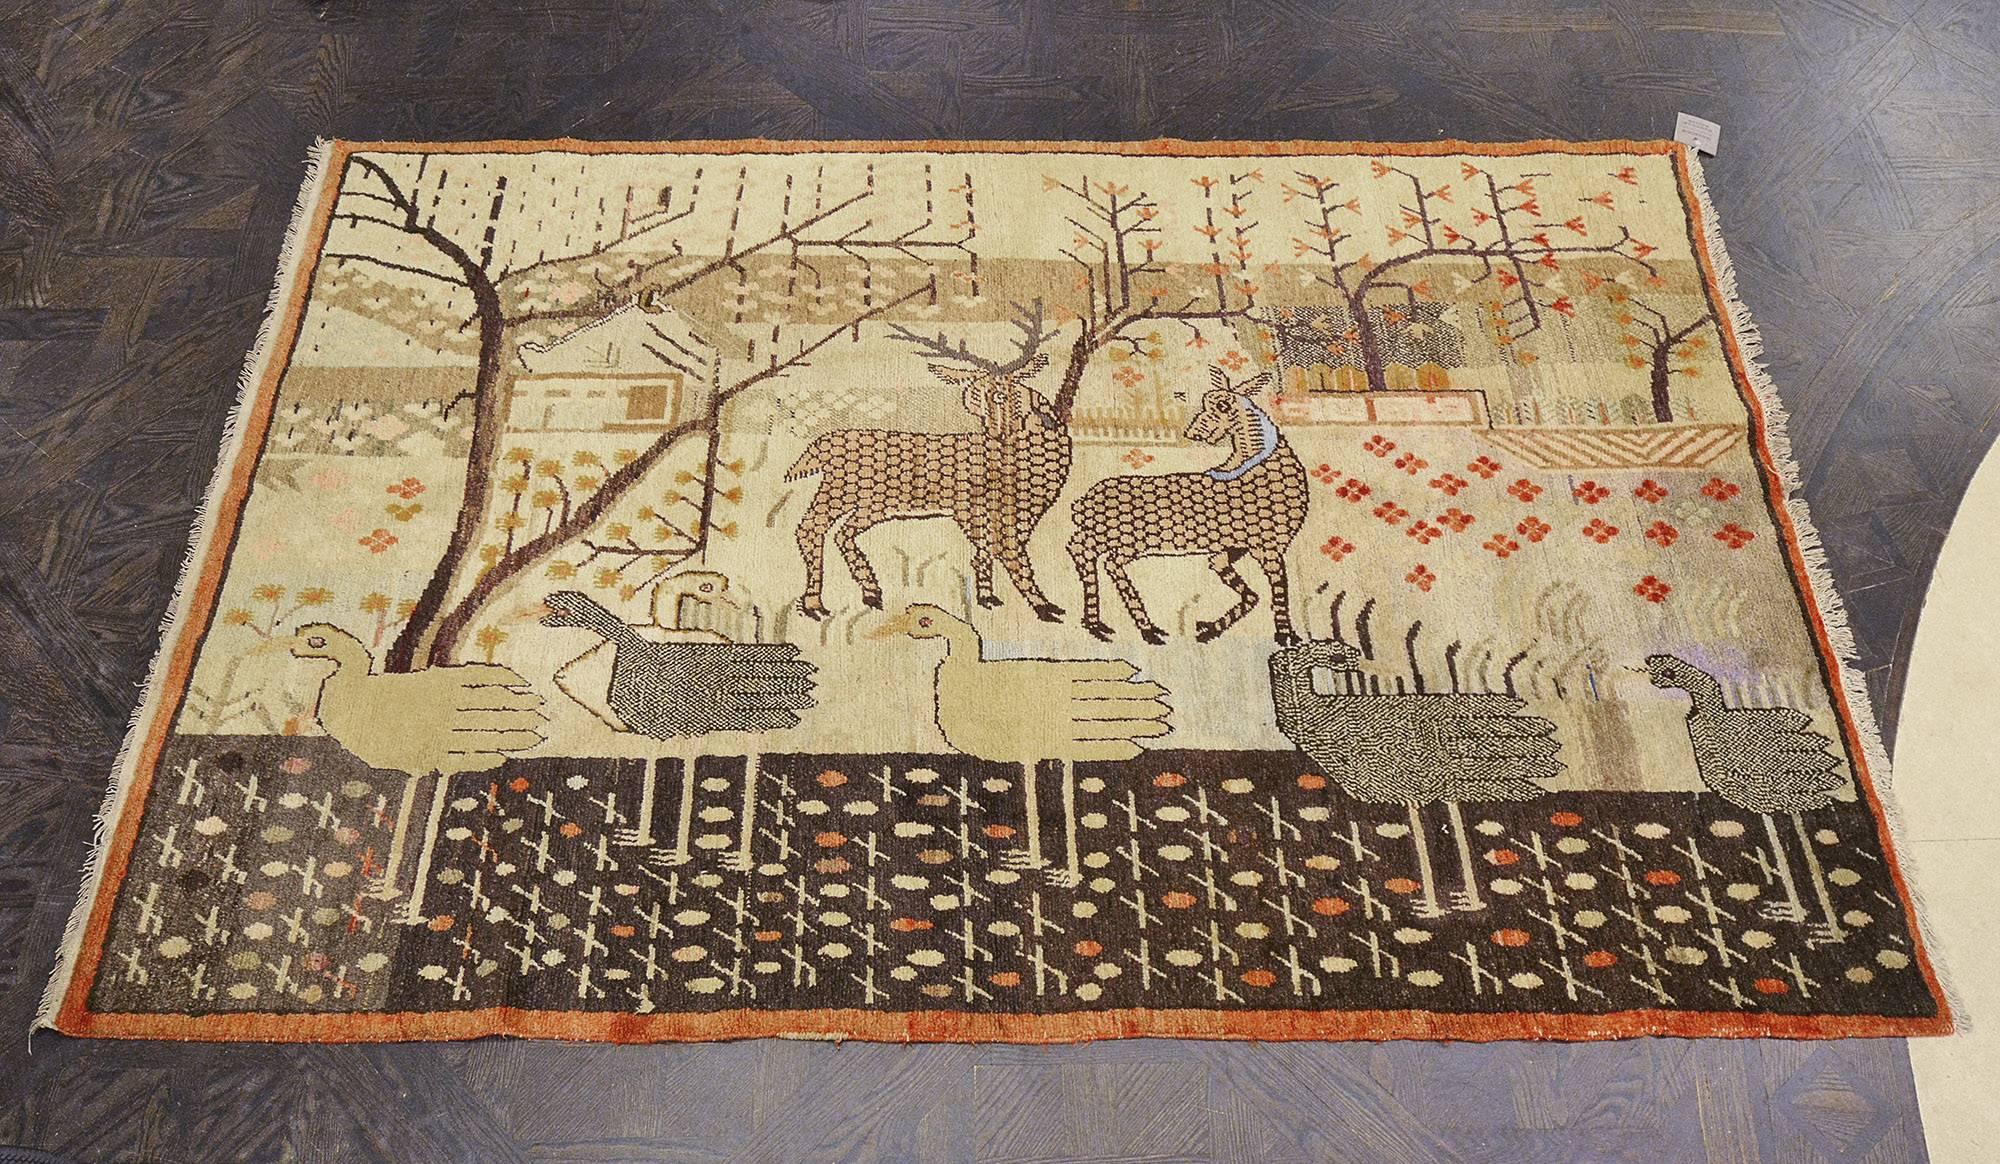 This traditional hand-woven Samarkand Khotan rug has an ivory pictorial field of geese and deer following in opposing directions, in a pasture of flowering trees, bushes, and bodies of water.